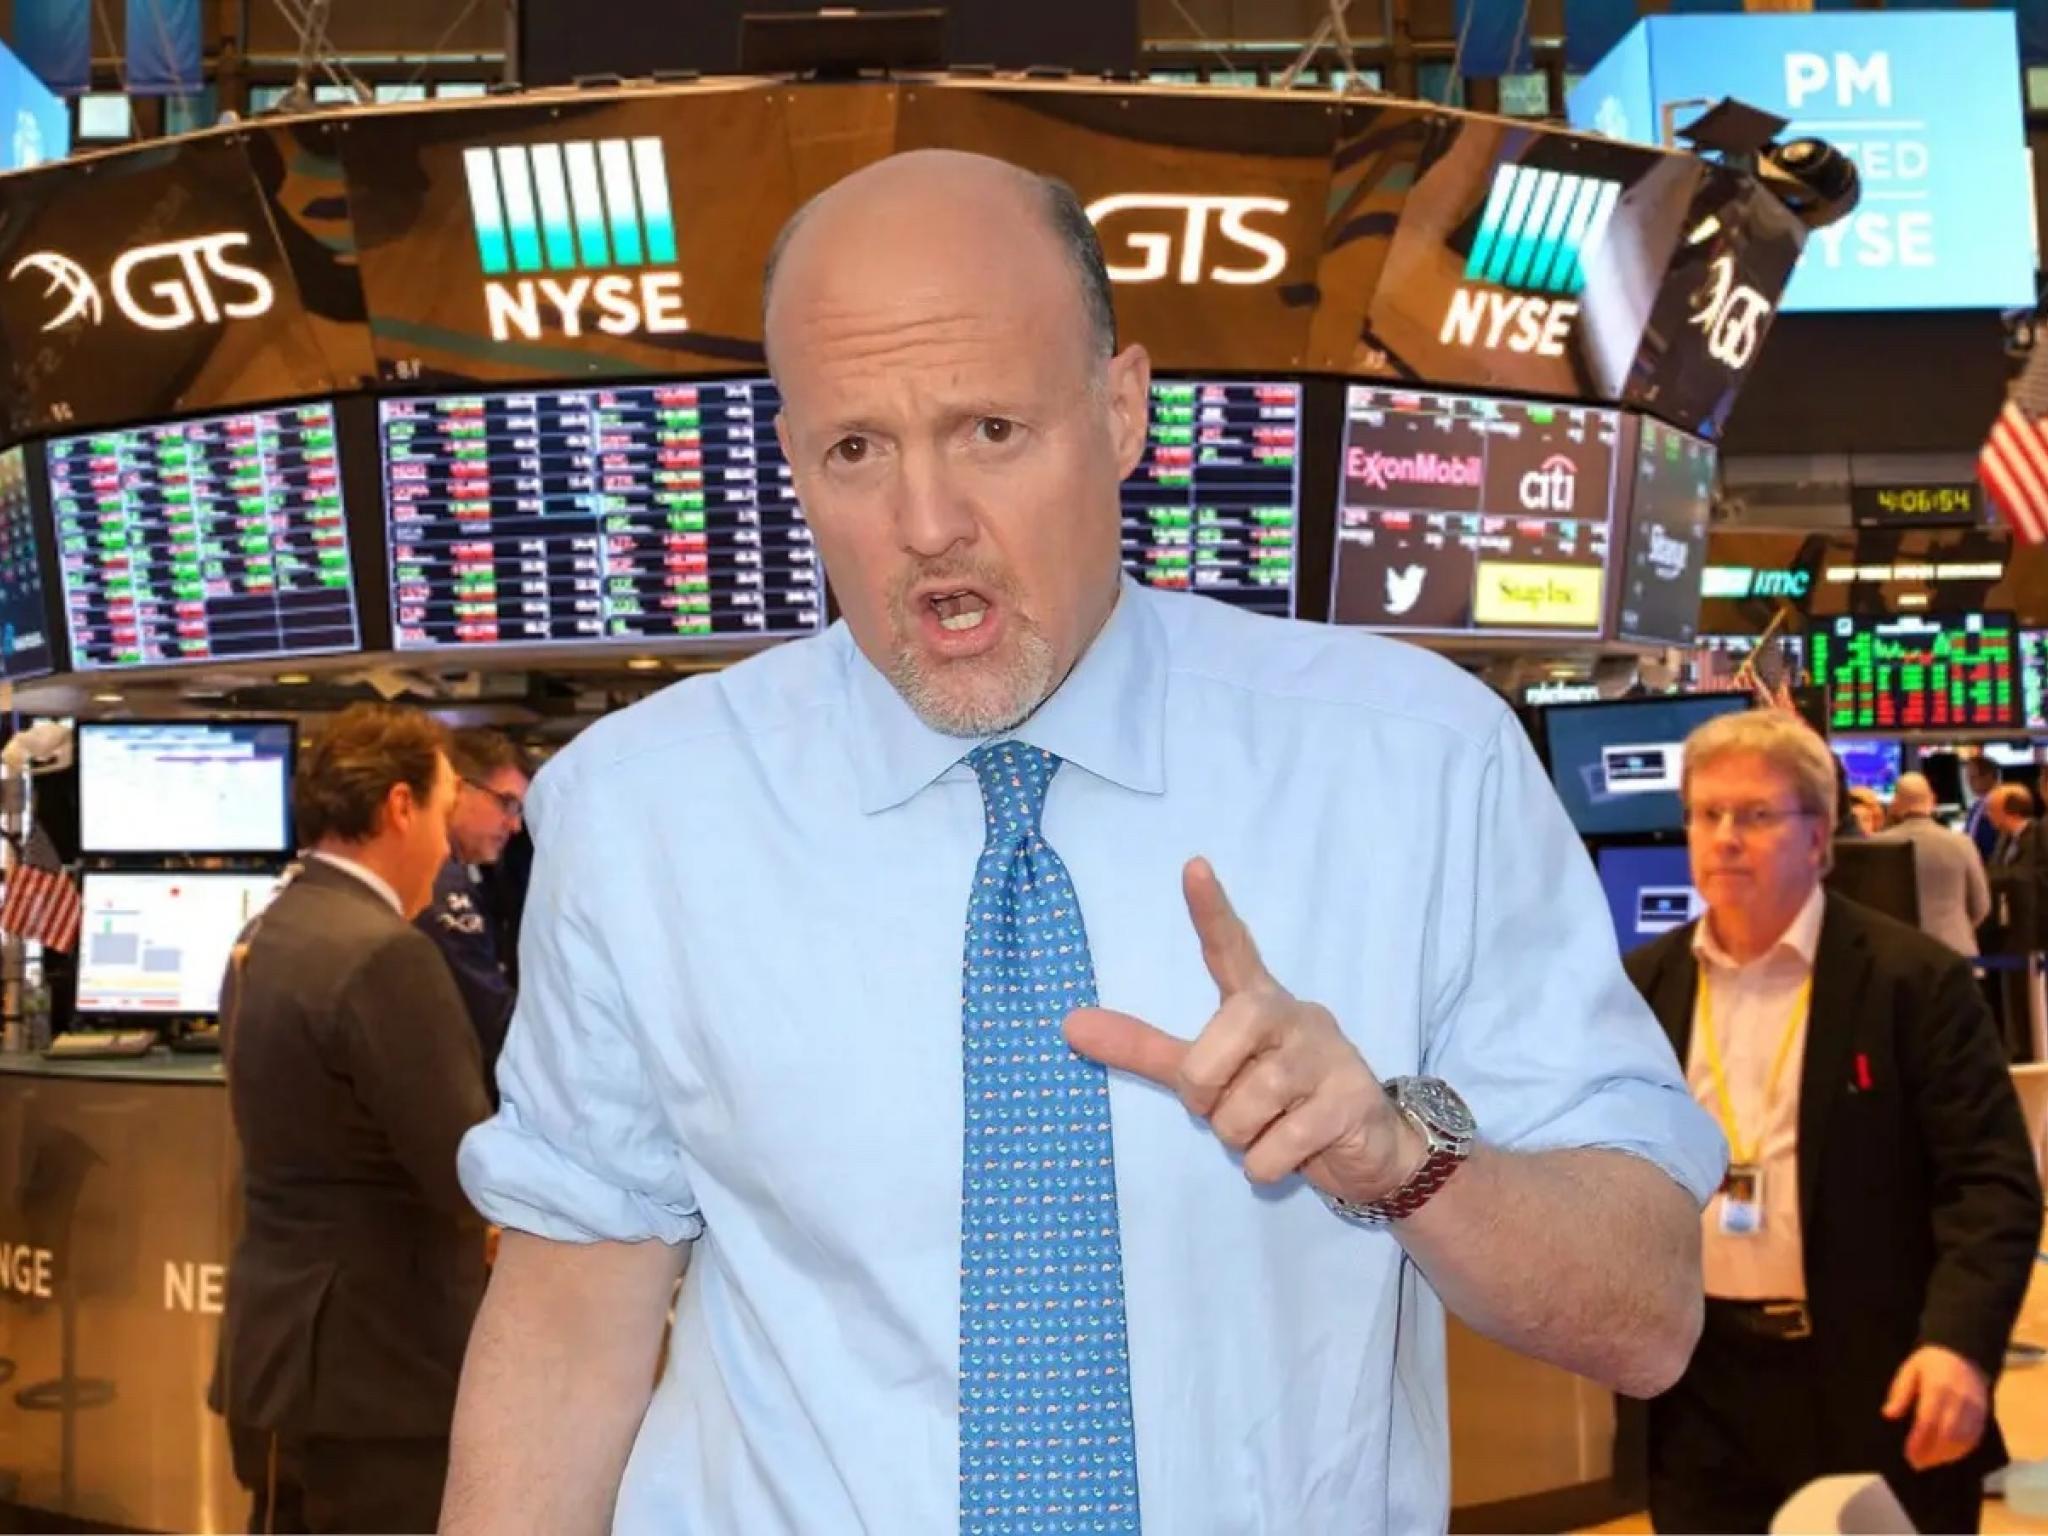  jim-cramer-this-tech-stock-is-great-archer-aviation-is-too-speculative-for-me 